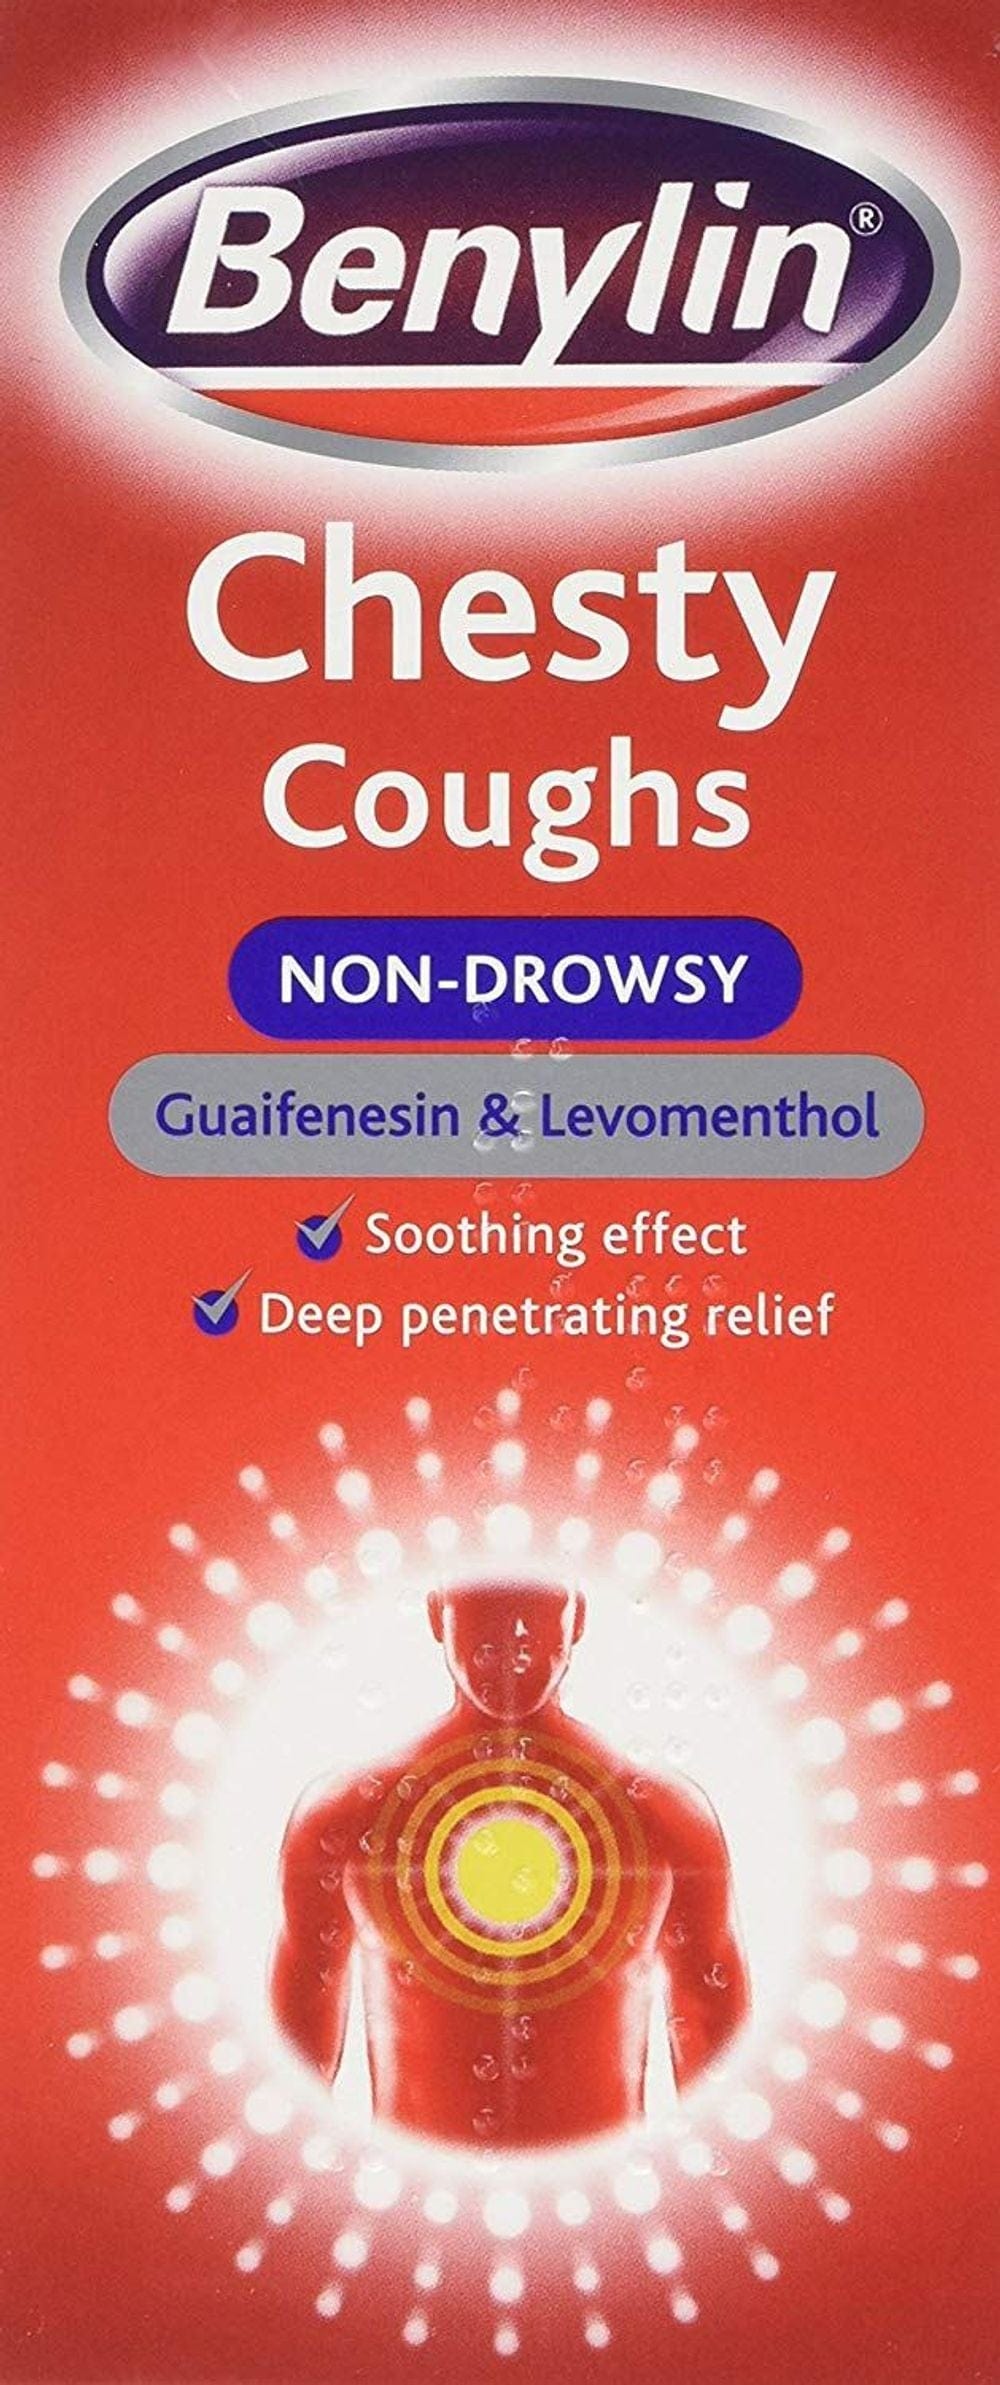 Benylin Chesty Coughs Non-Drowsy 300ml TapClickBuy